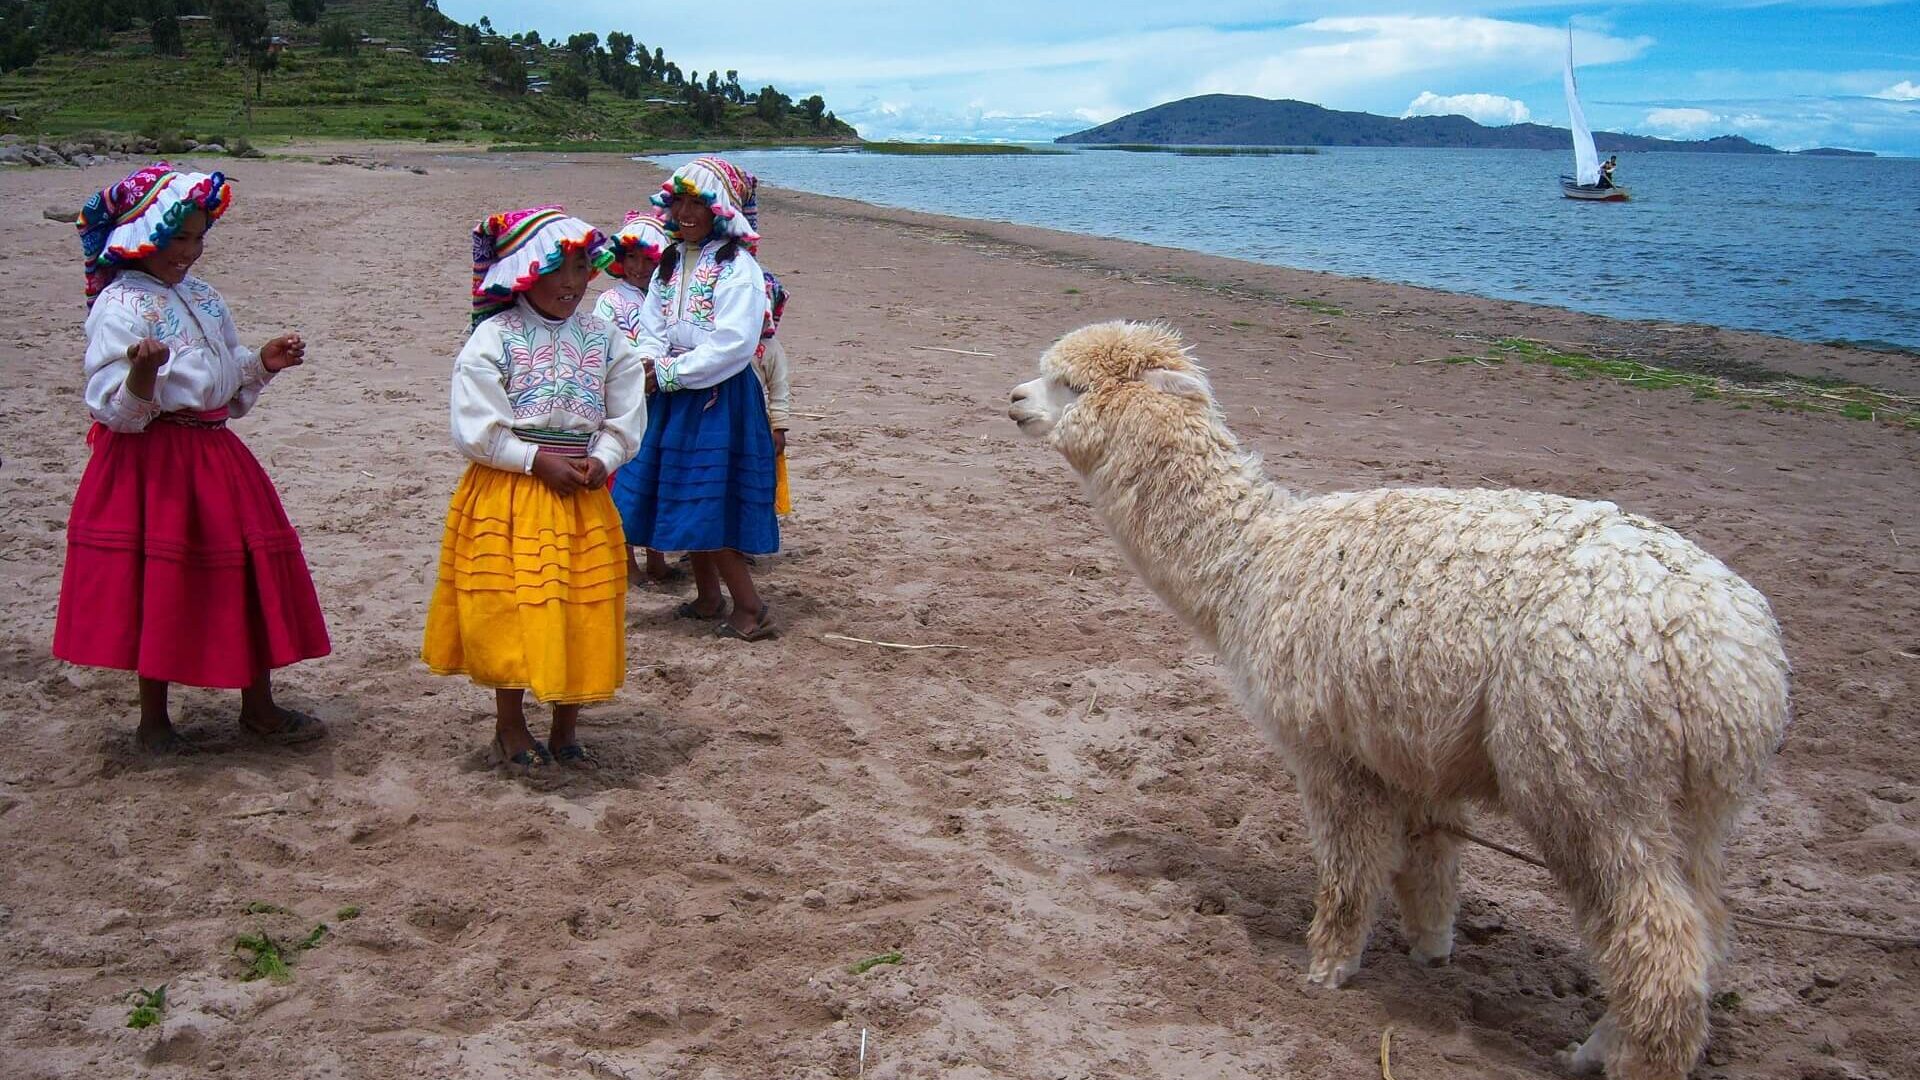 Traditionally dressed girls from Llachón at the shores of Lake Titicaca with an alpaca and a sailboat. Visit Lake Titicaca in a sustainable fashion and get off the beaten path with RESPONSible Travel Peru.